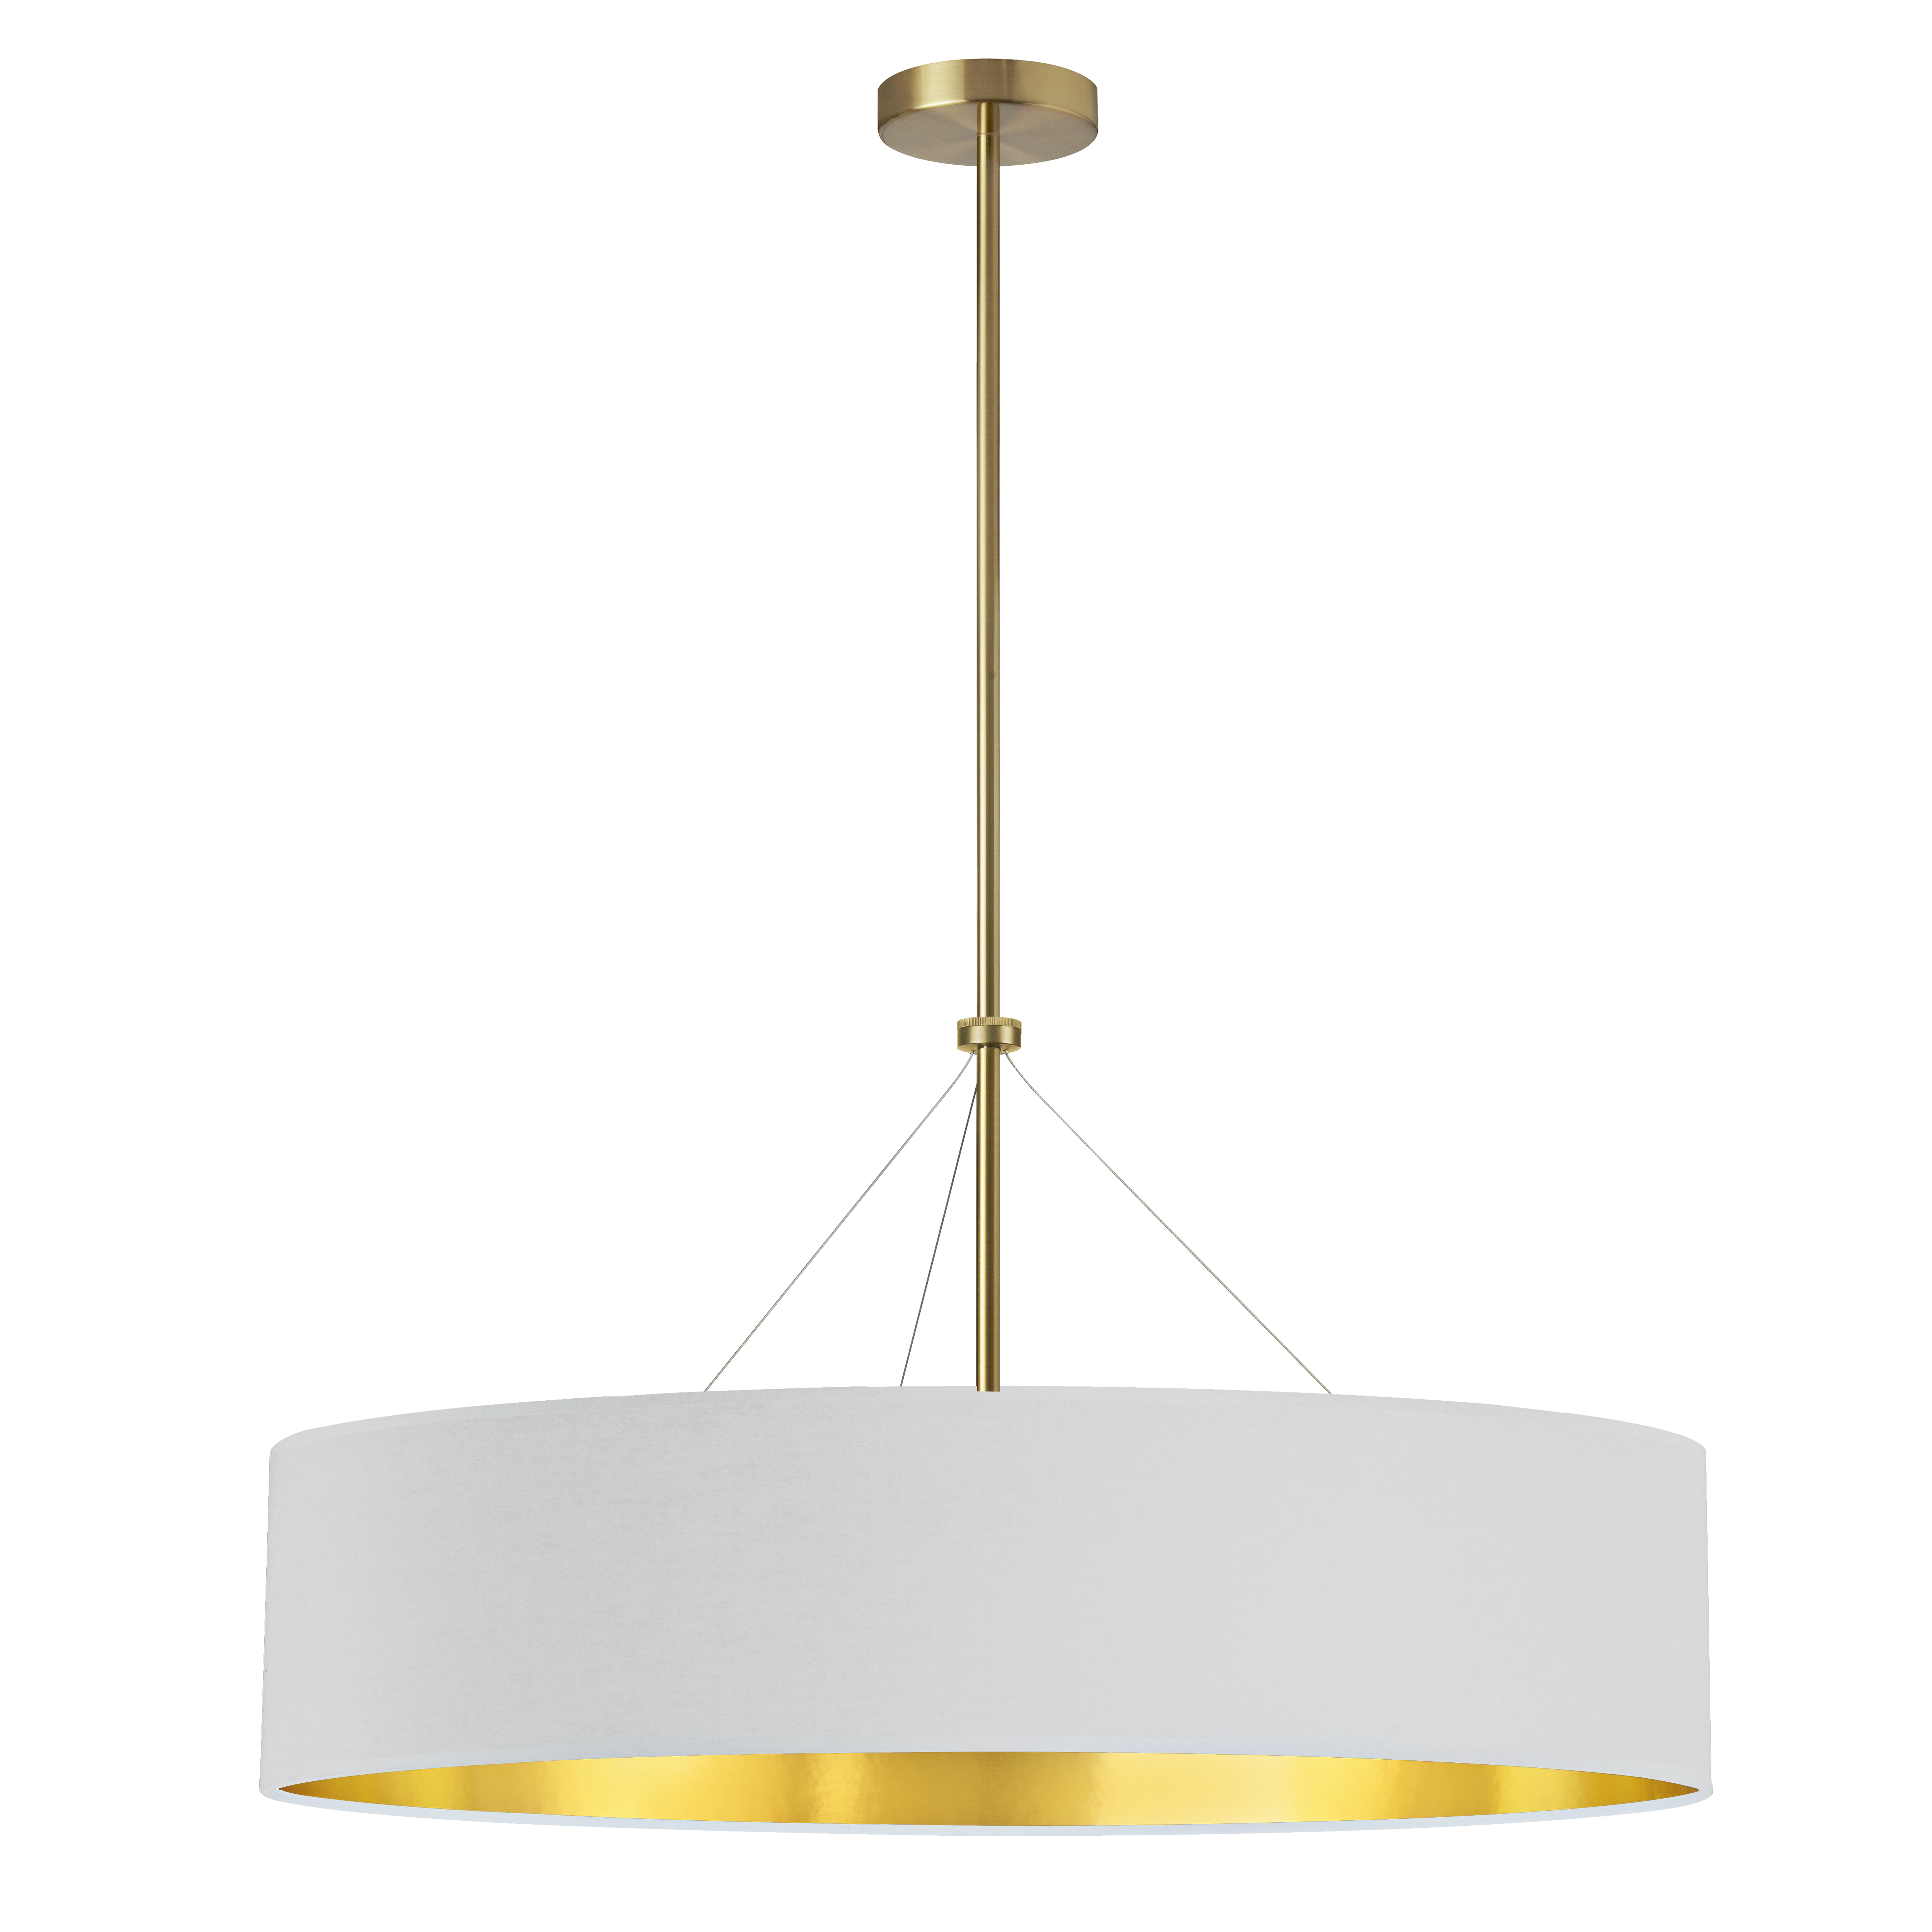 A shimmering gold finish interior and a slim profile create the allure of the Pallavi family of lighting. It adds a touch of contemporary glamour to your home. A metal drop and frame in your choice of finish hold a slim drum style fabric shade with a contrasting gold interior surface. It's a look that will garner attention, while also complementing the surrounding furnishings. With its elegant allure, the Pallavi family of lighting is perfect for the main rooms of your home, including kitchen, living and dining rooms.